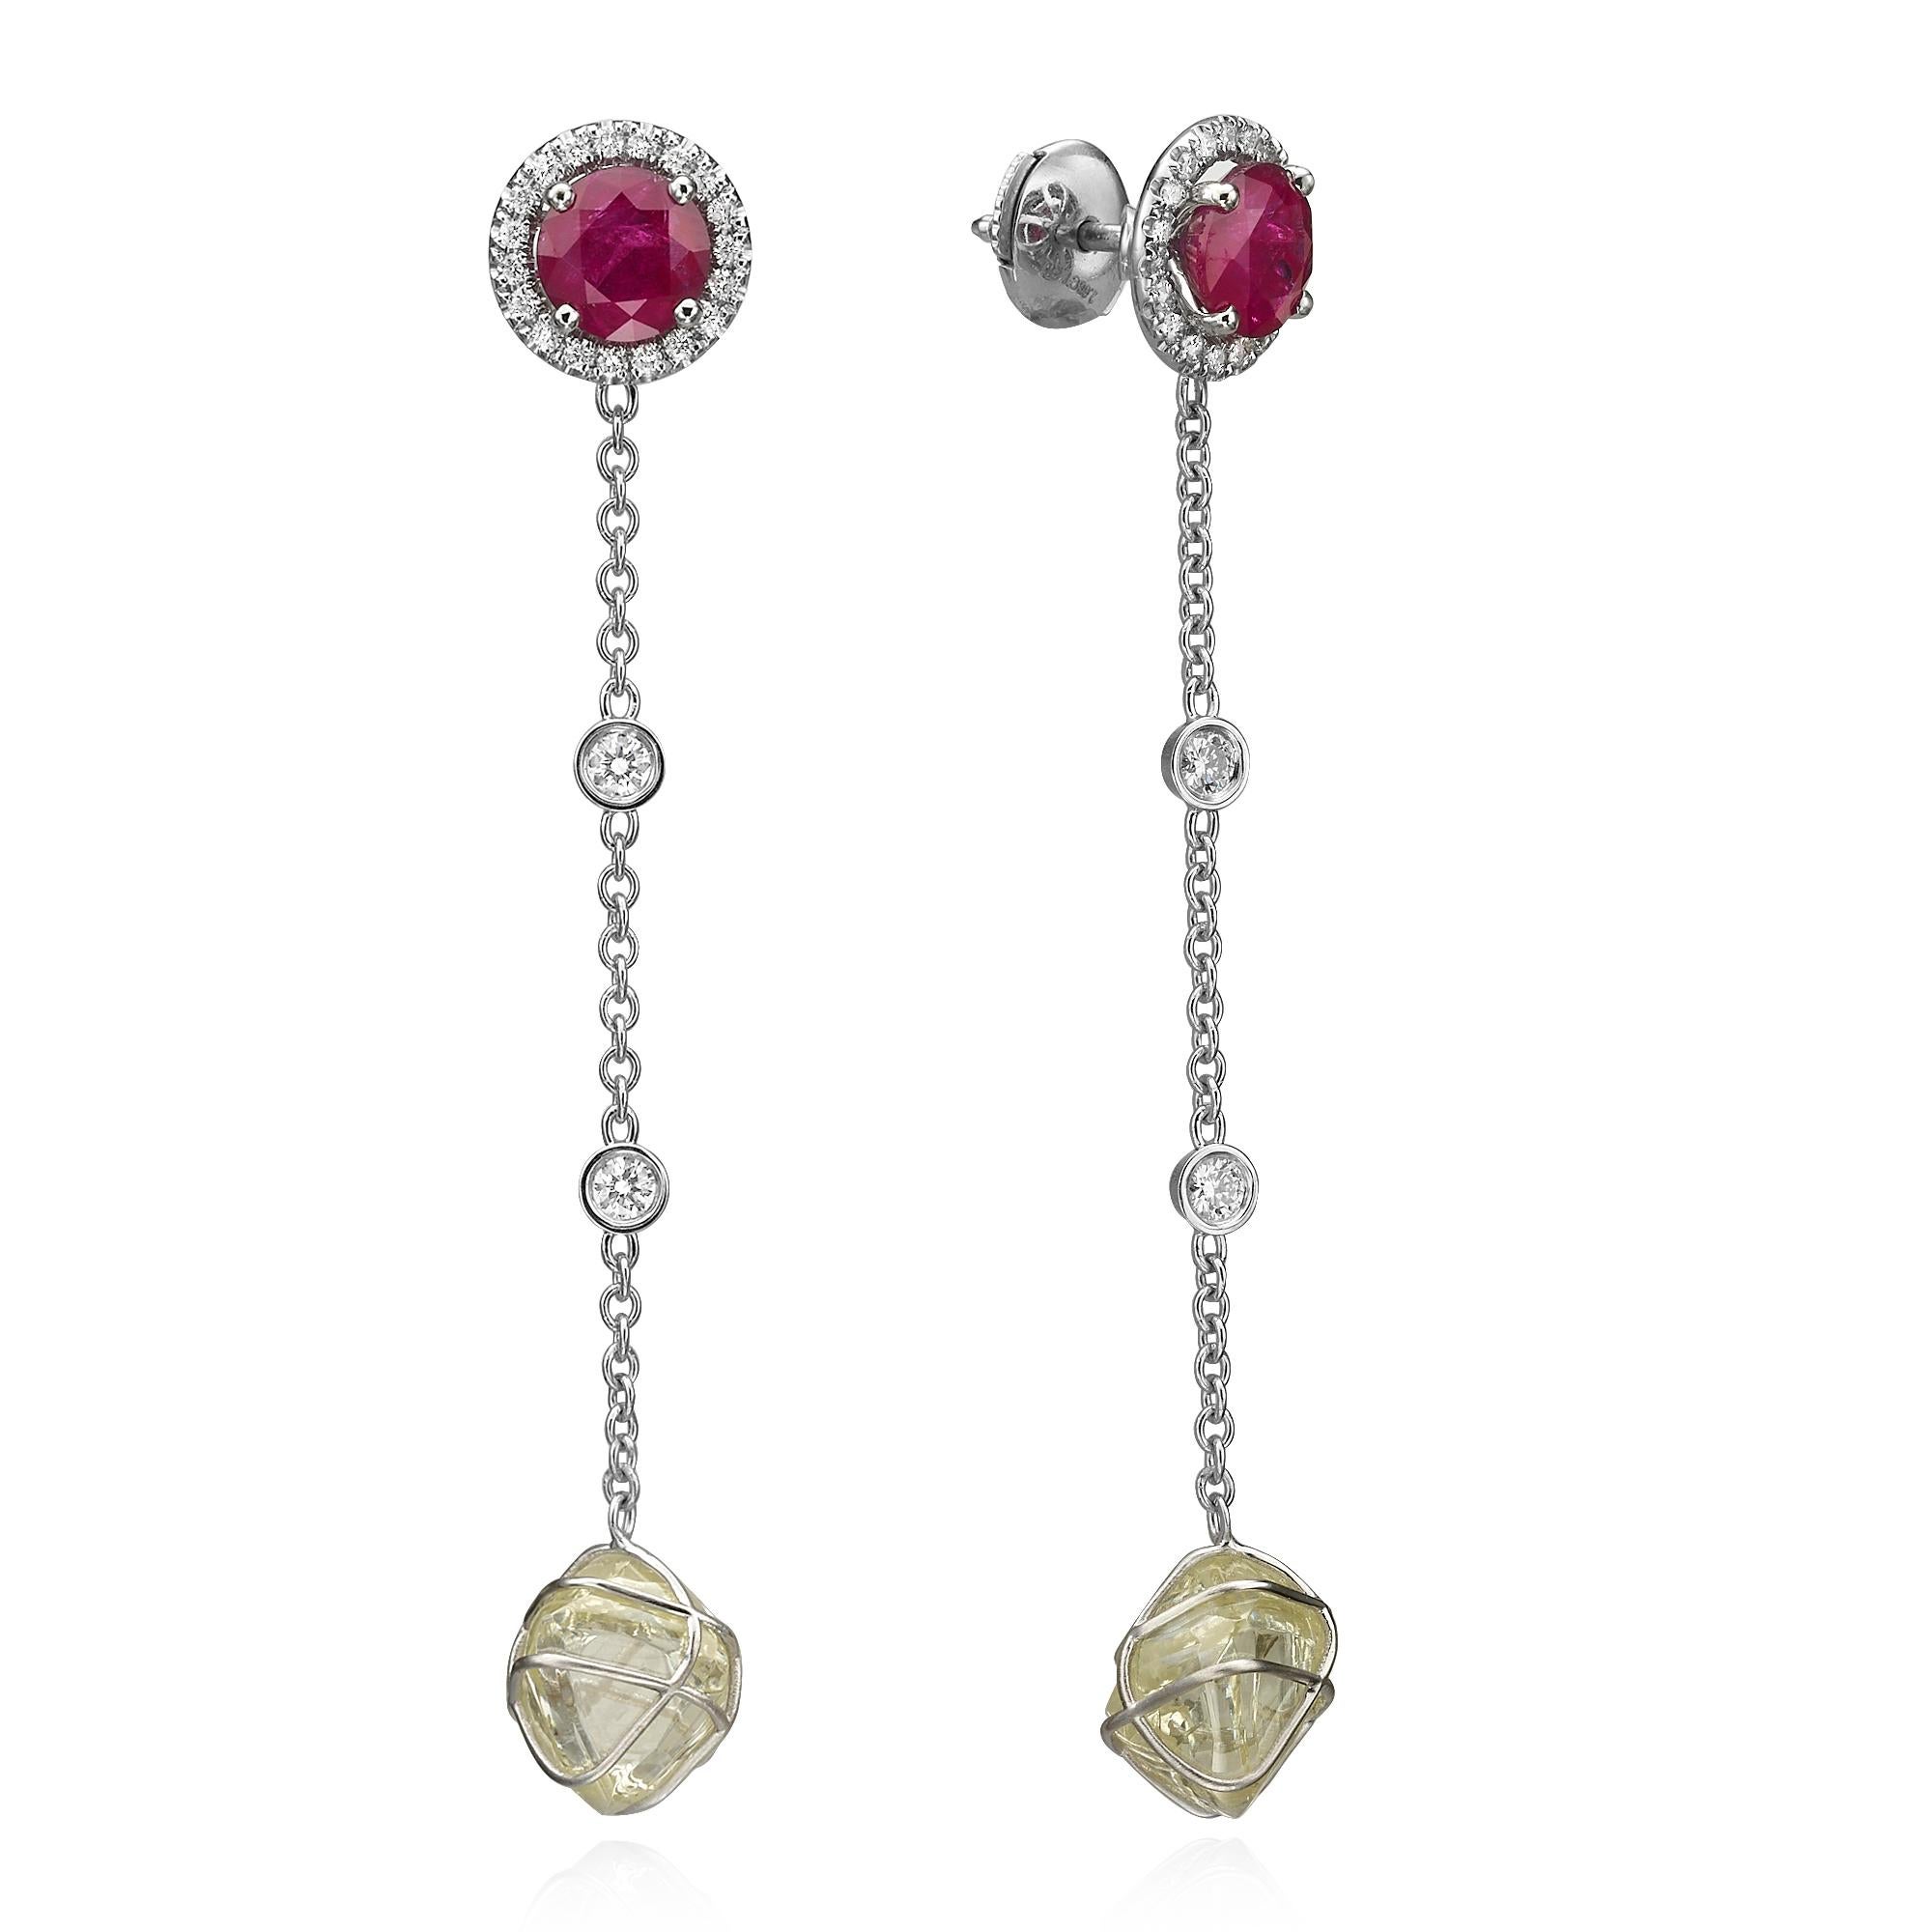 Our handcrafted Dangling earrings 13.81 carat TDW are made with detailed craftsmanship and one of a kind design. Natural Raw diamonds and High quality Round Brilliant Cut diamonds capture the beauty of a diamond evolution from raw to perfection.